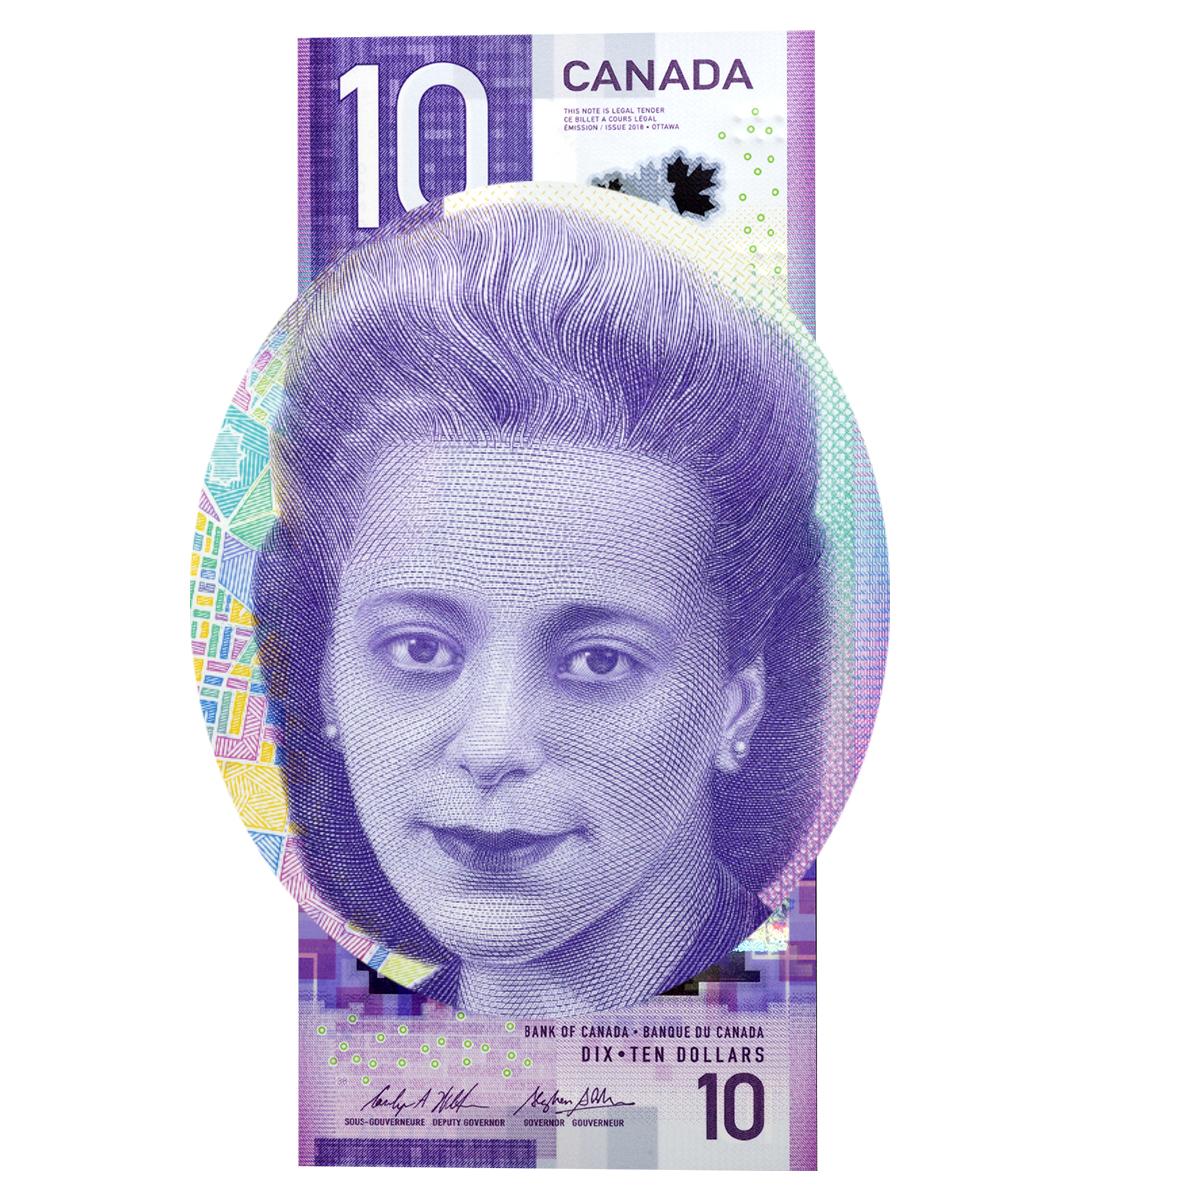 Bank note portrait, young black woman with dark hair pulled back and up.